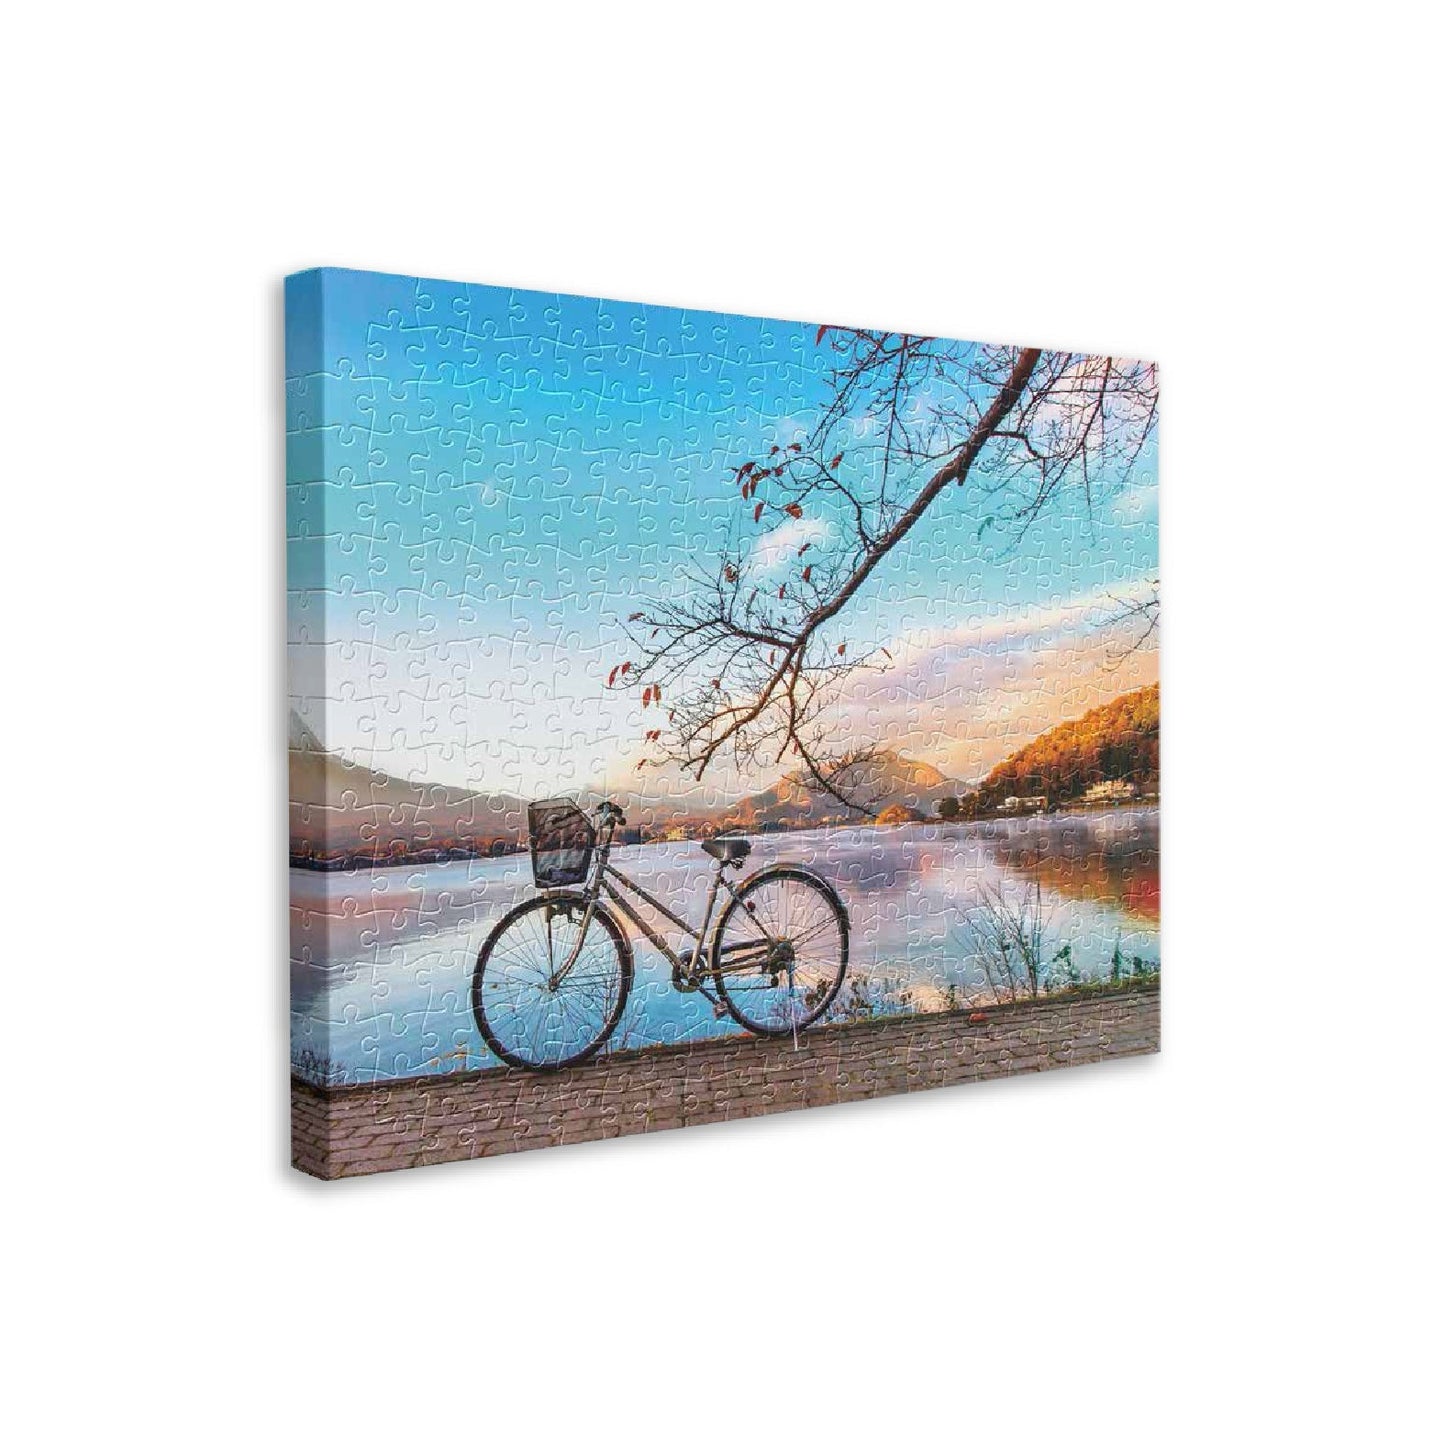 Away from the City - Bicycle by the Serene Lake - 366 Piece Jigsaw Puzzle